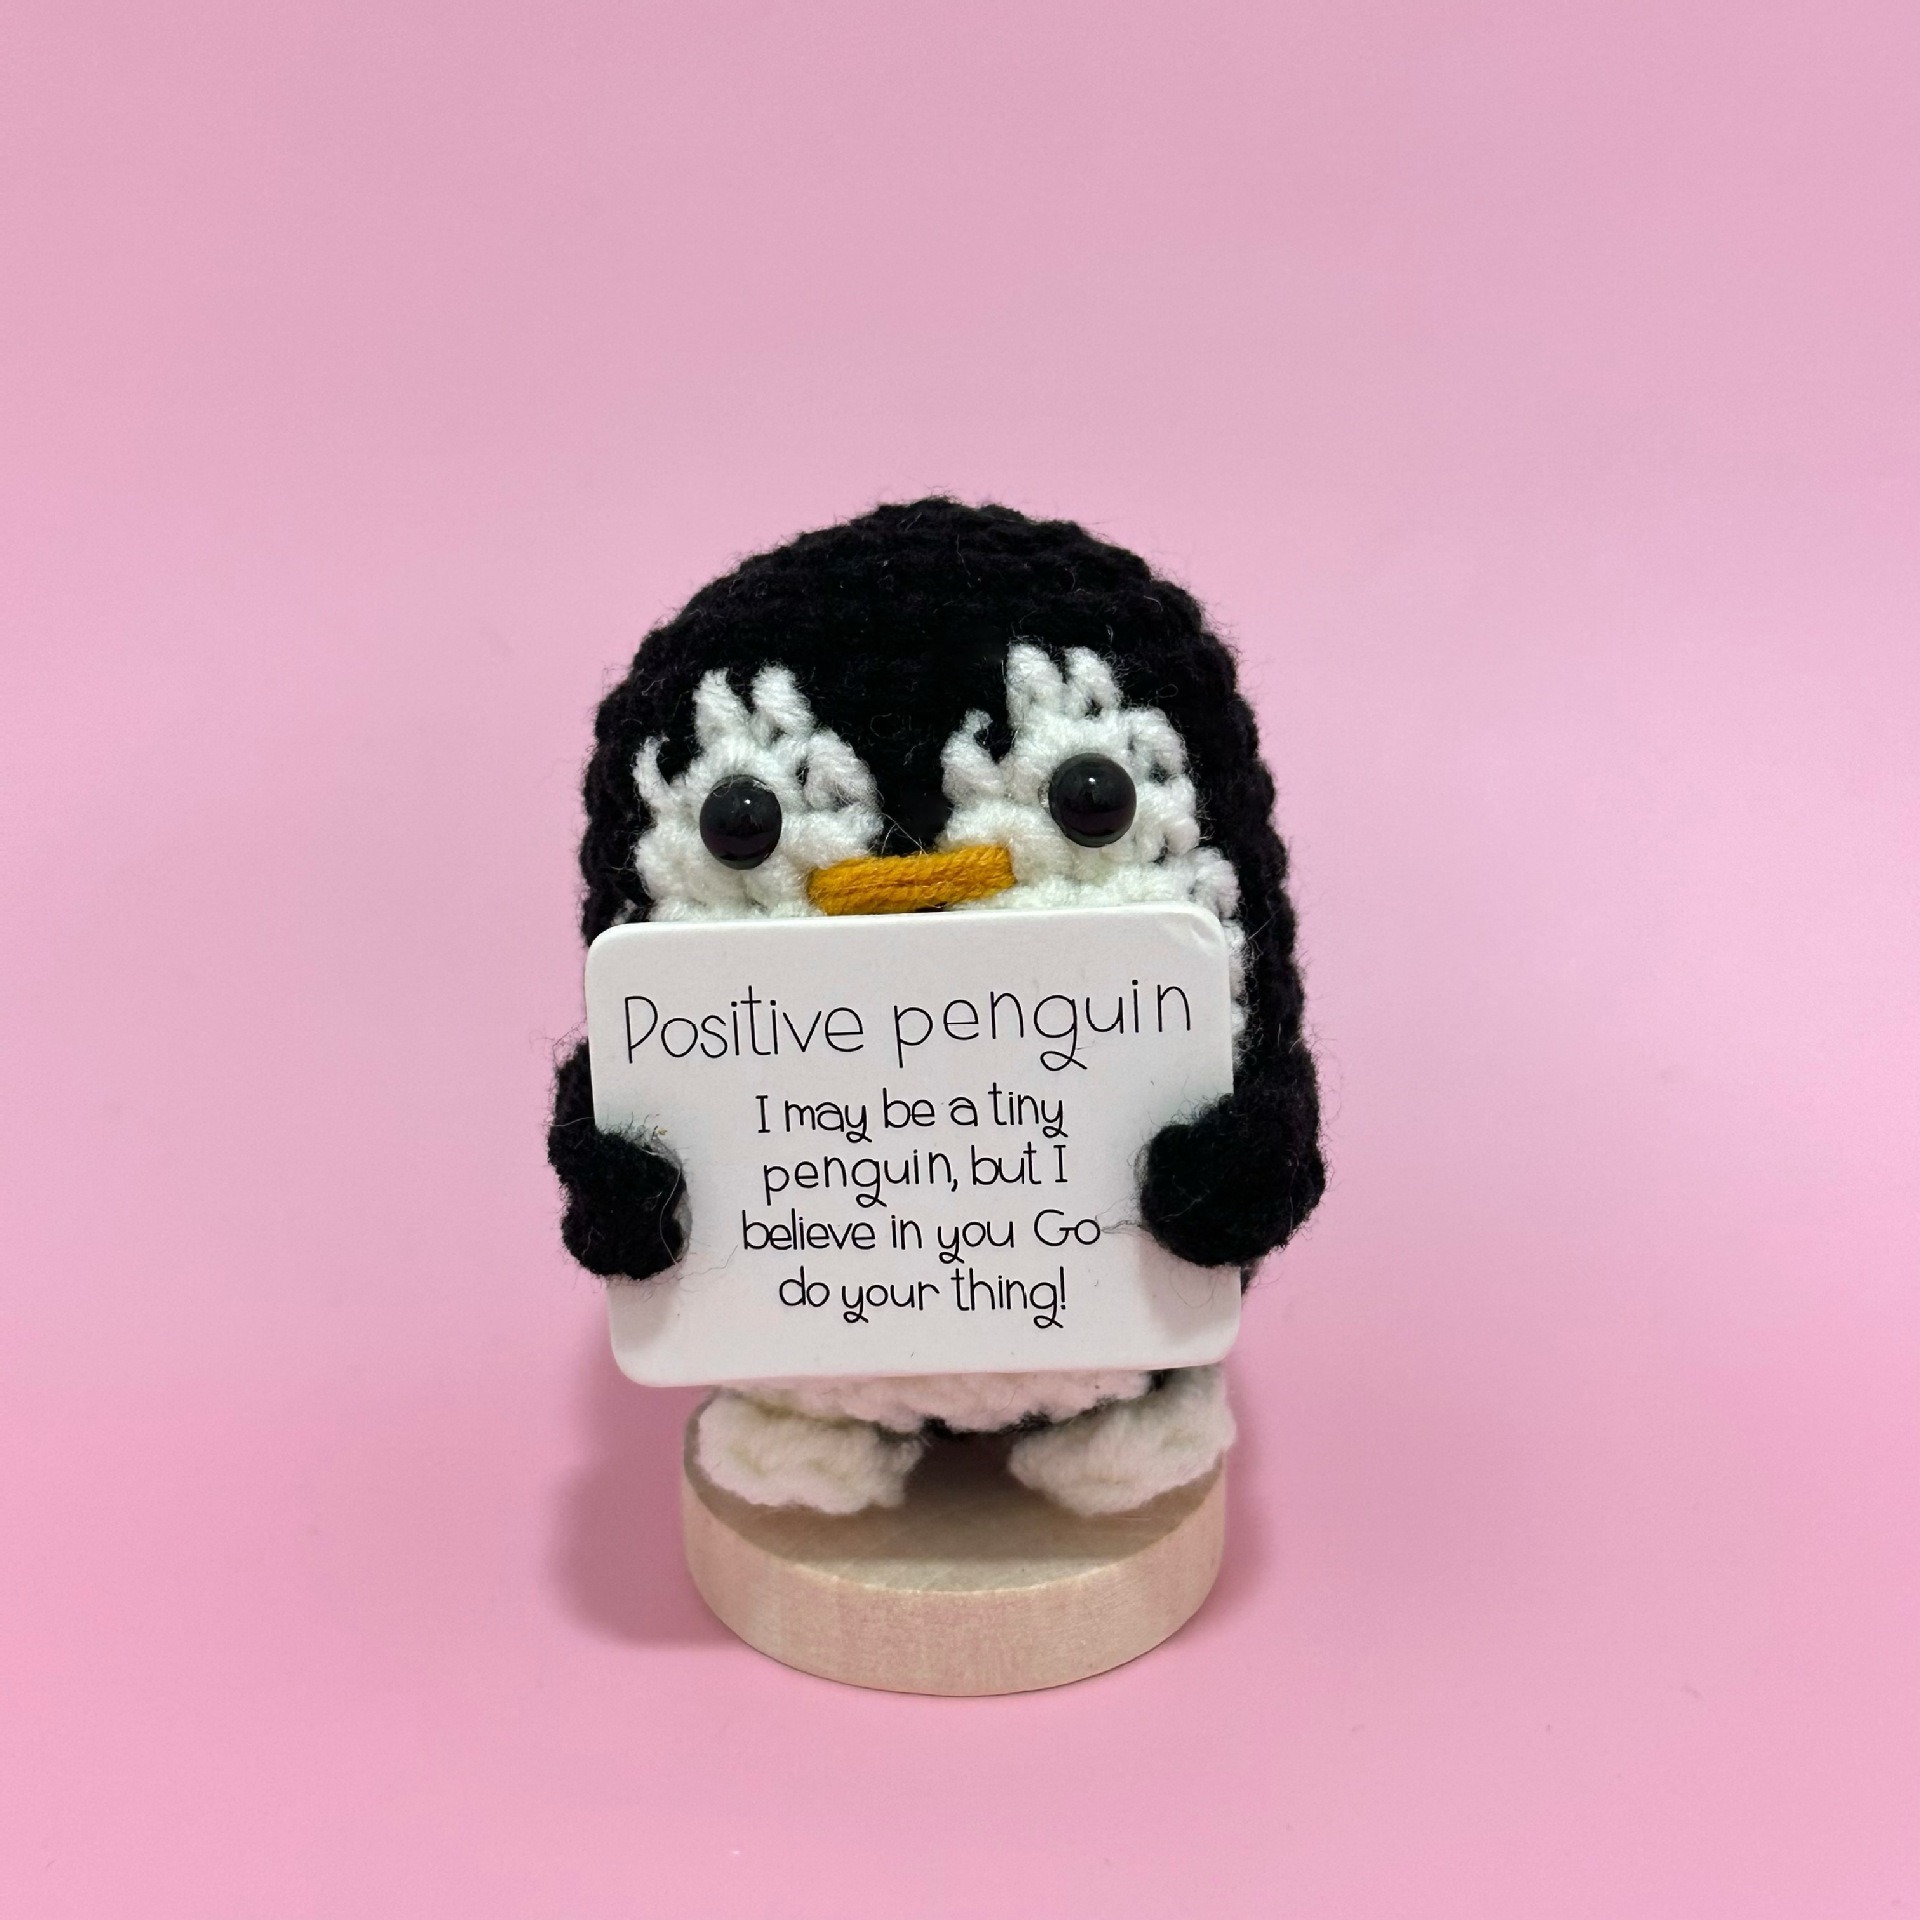 emotional support pickles, Gallery posted by cozycatcrochet